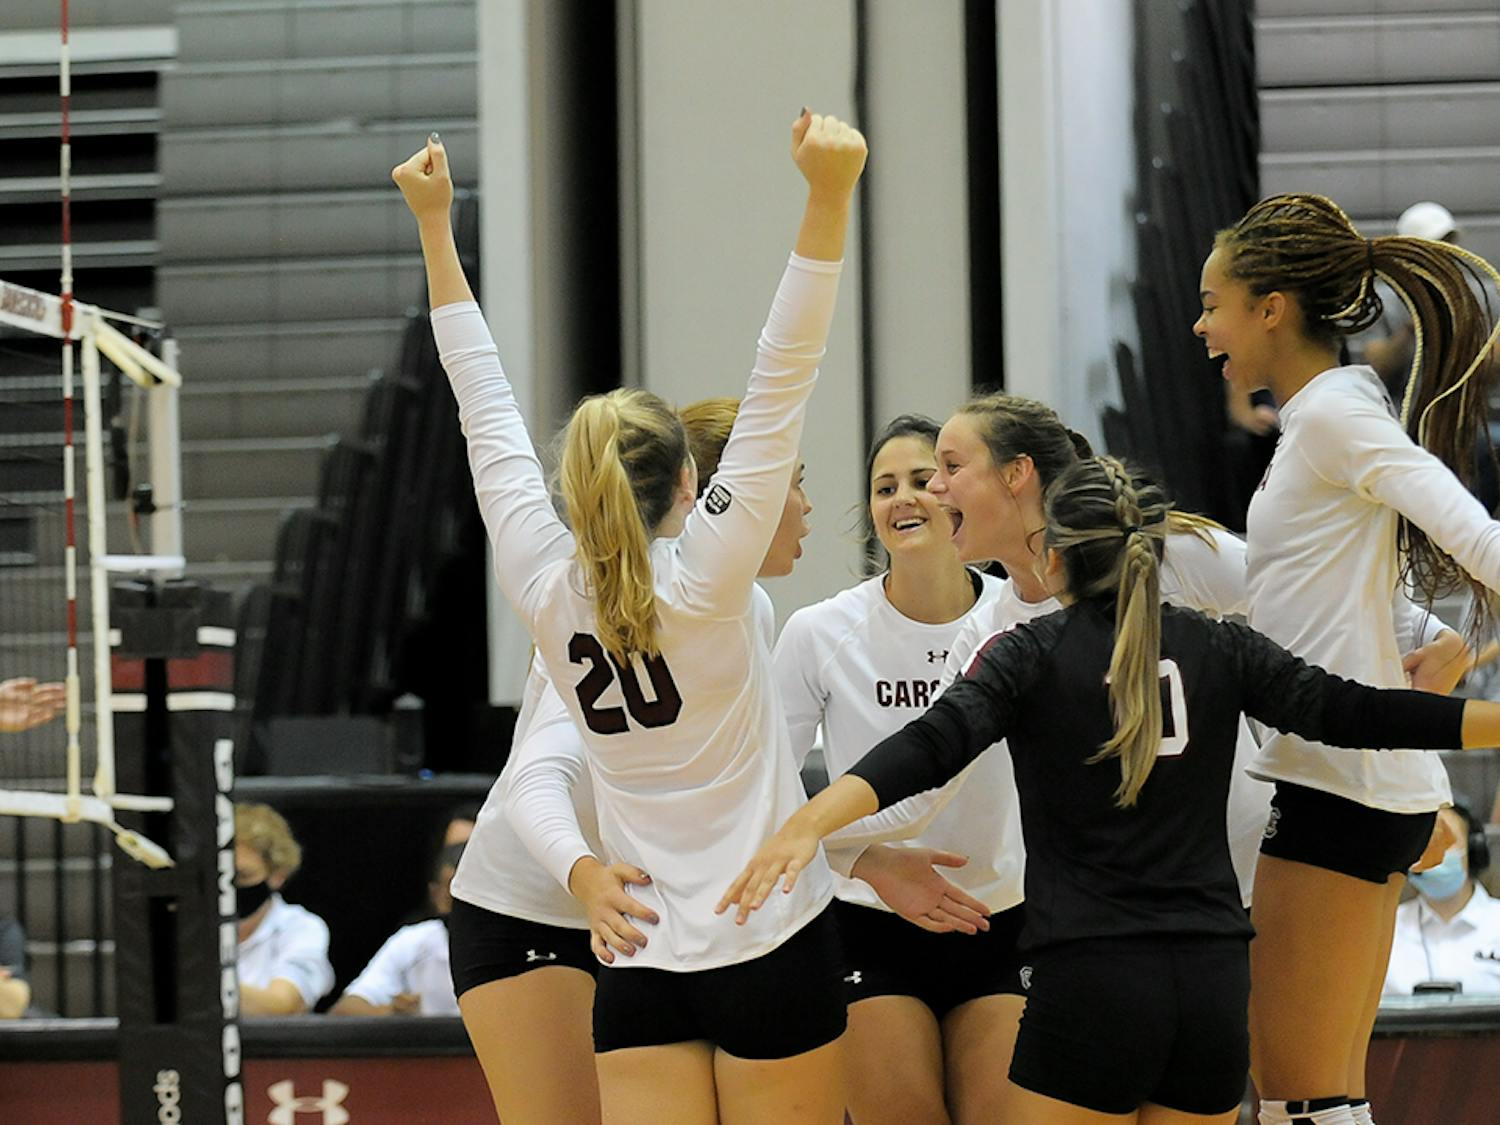 The Women’s Volleyball team is greeted by teammates after their 3-0 victory against Alabama. This win follows the loss against Alabama on the previous day.